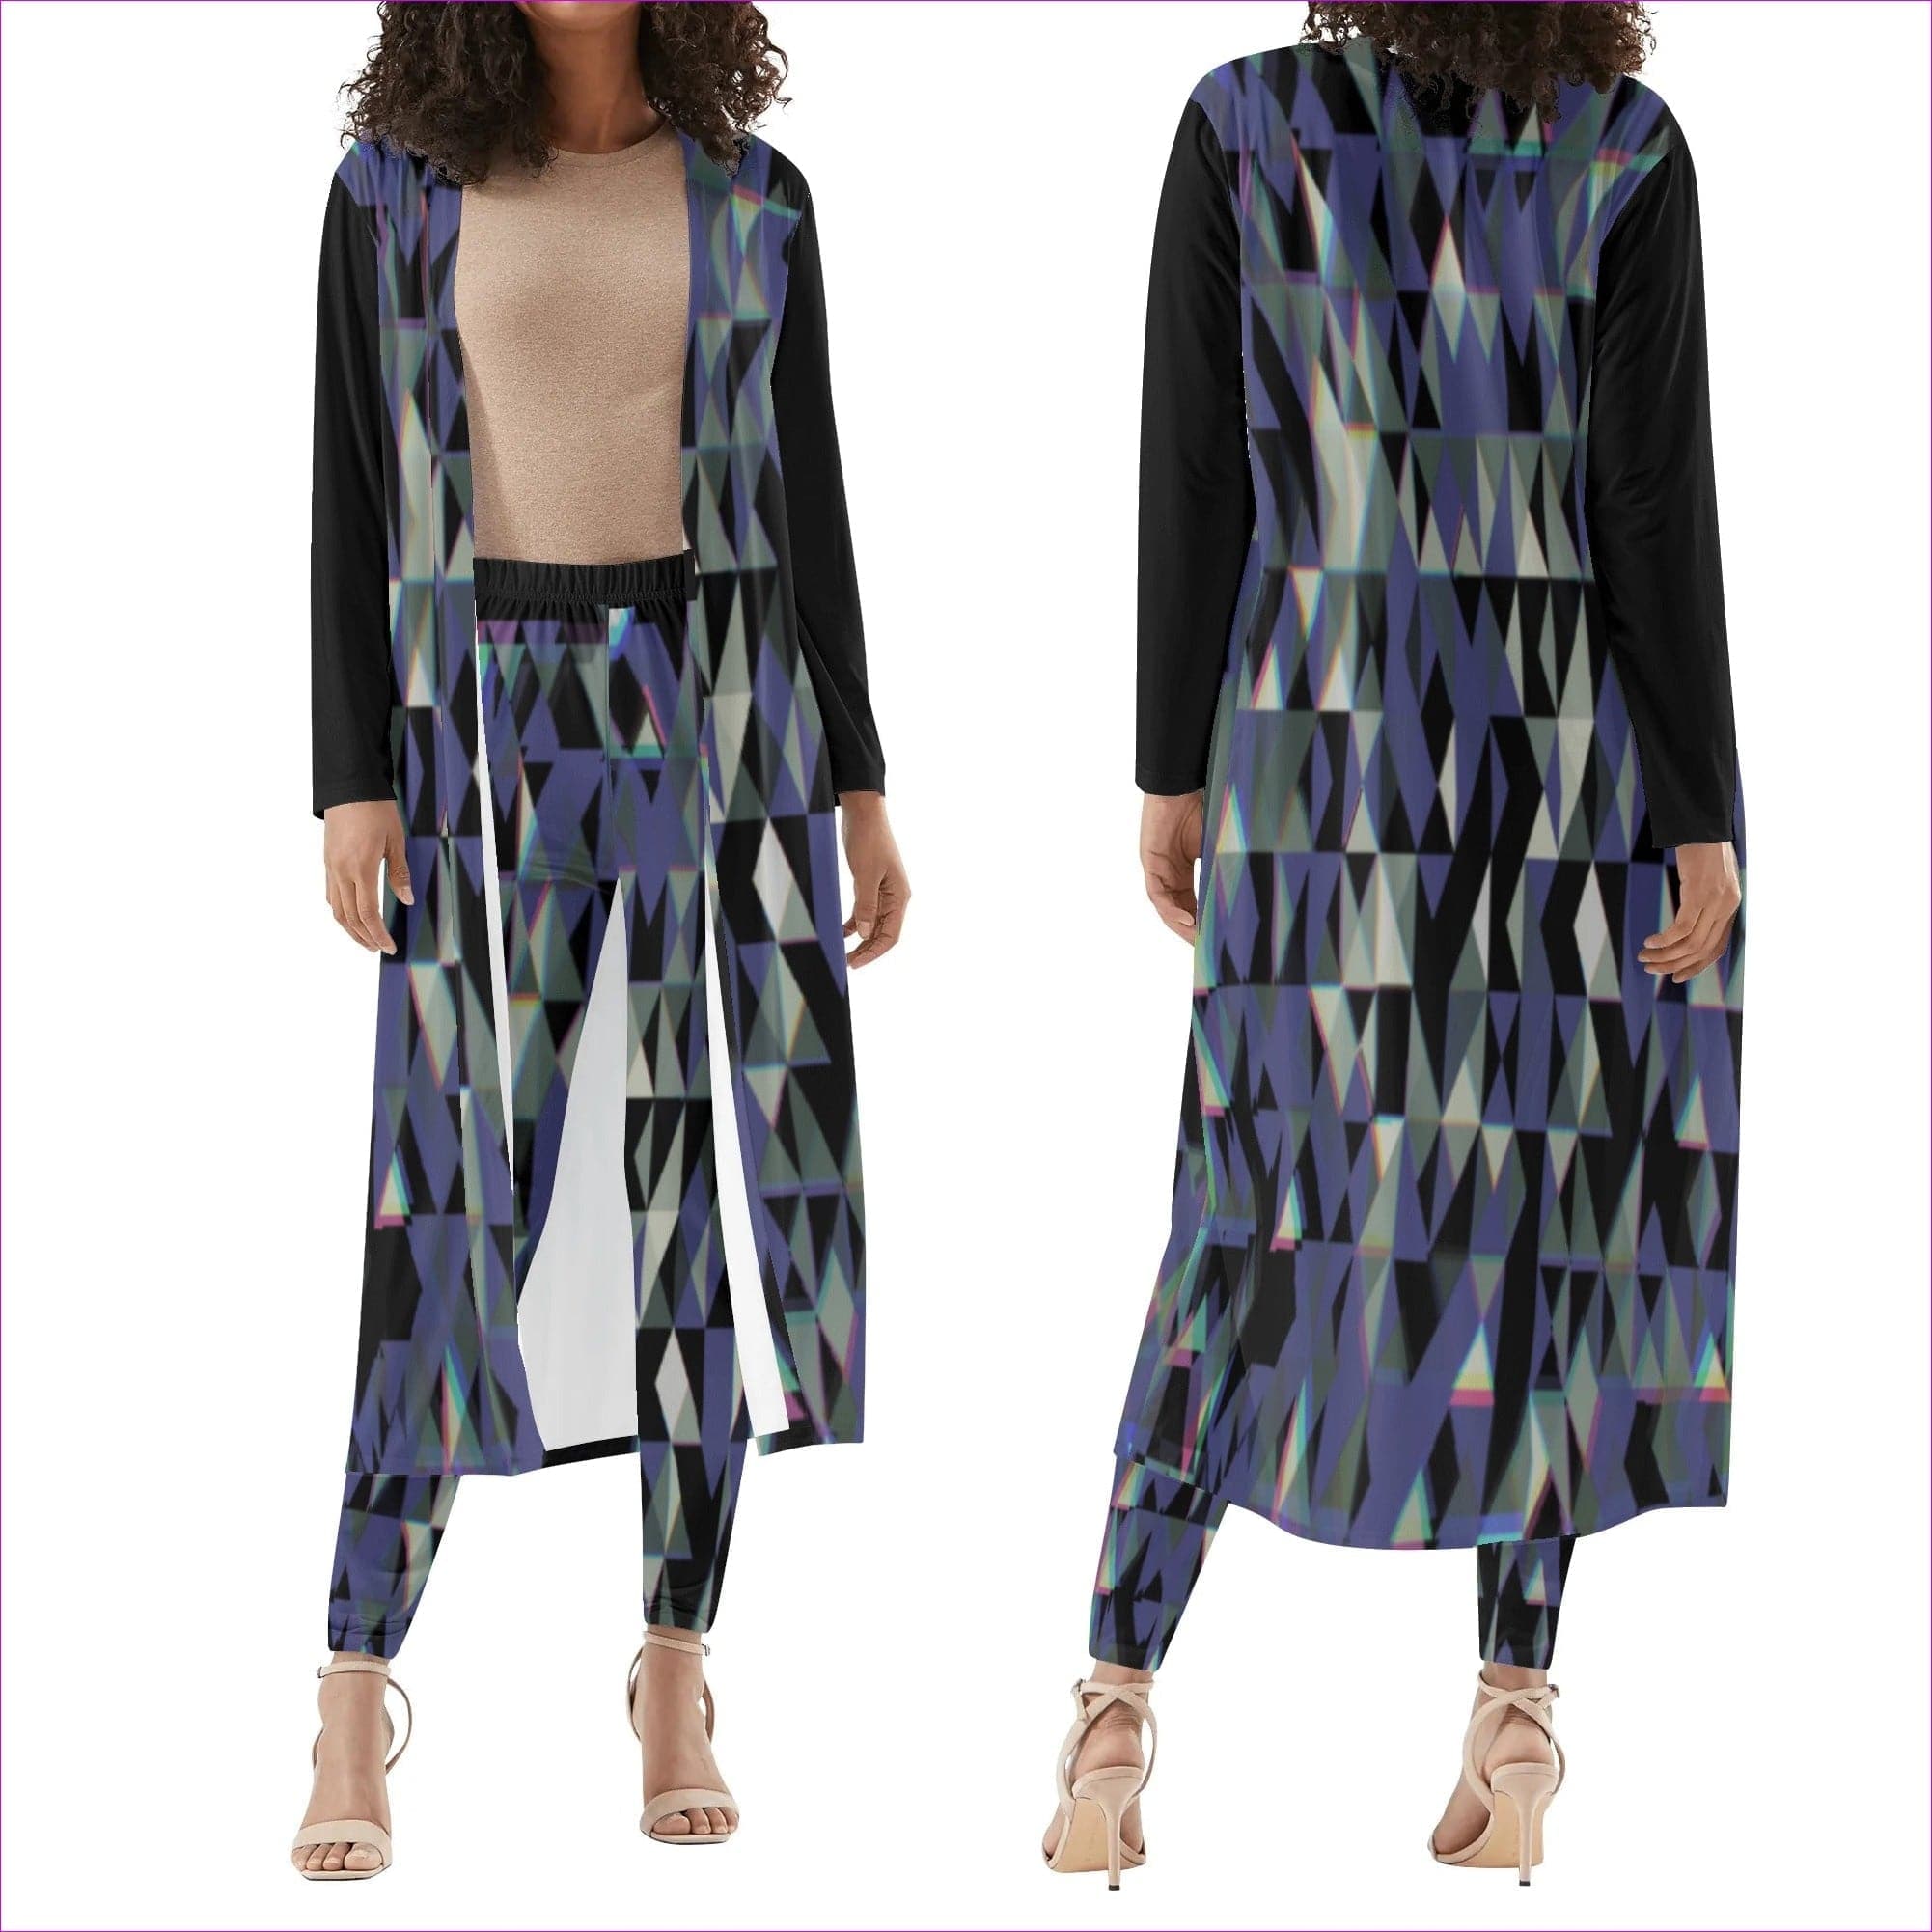 Blue Black S - Fractured Womens Long Sleeve Cardigan and Leggings 2pcs - womens top & leggings set at TFC&H Co.